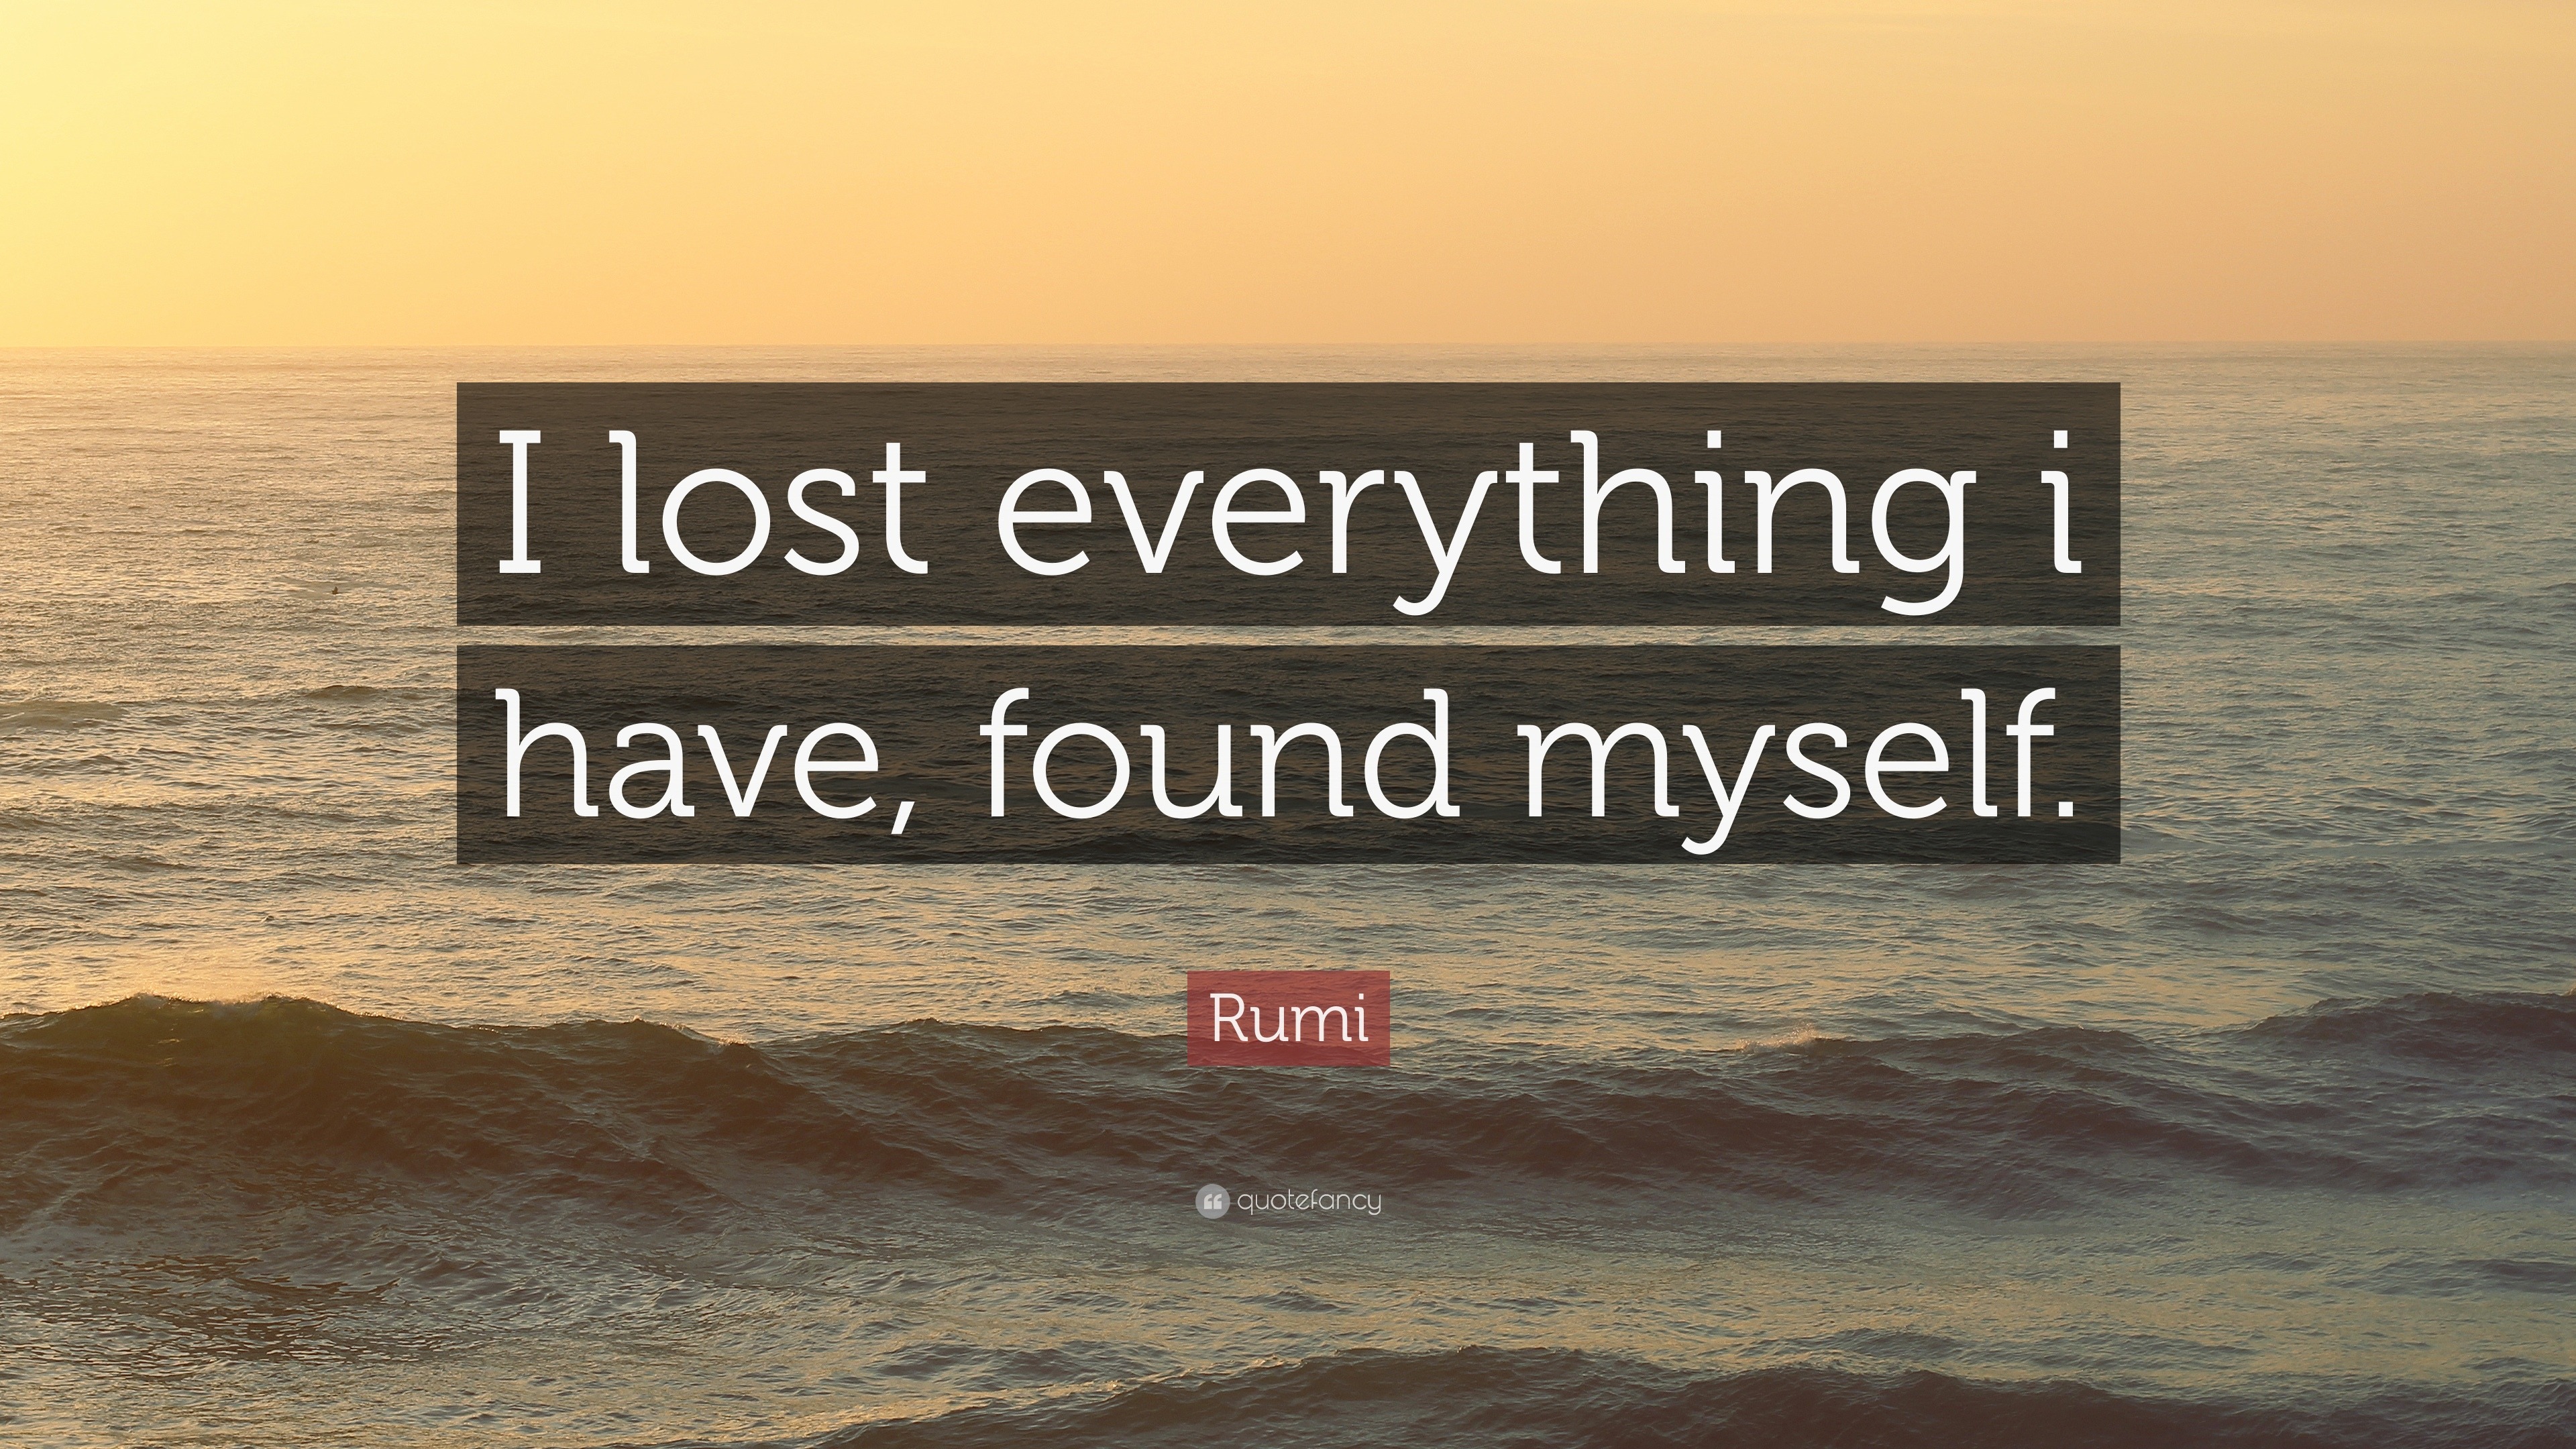 Rumi Quote: “I lost everything i have, found myself.”